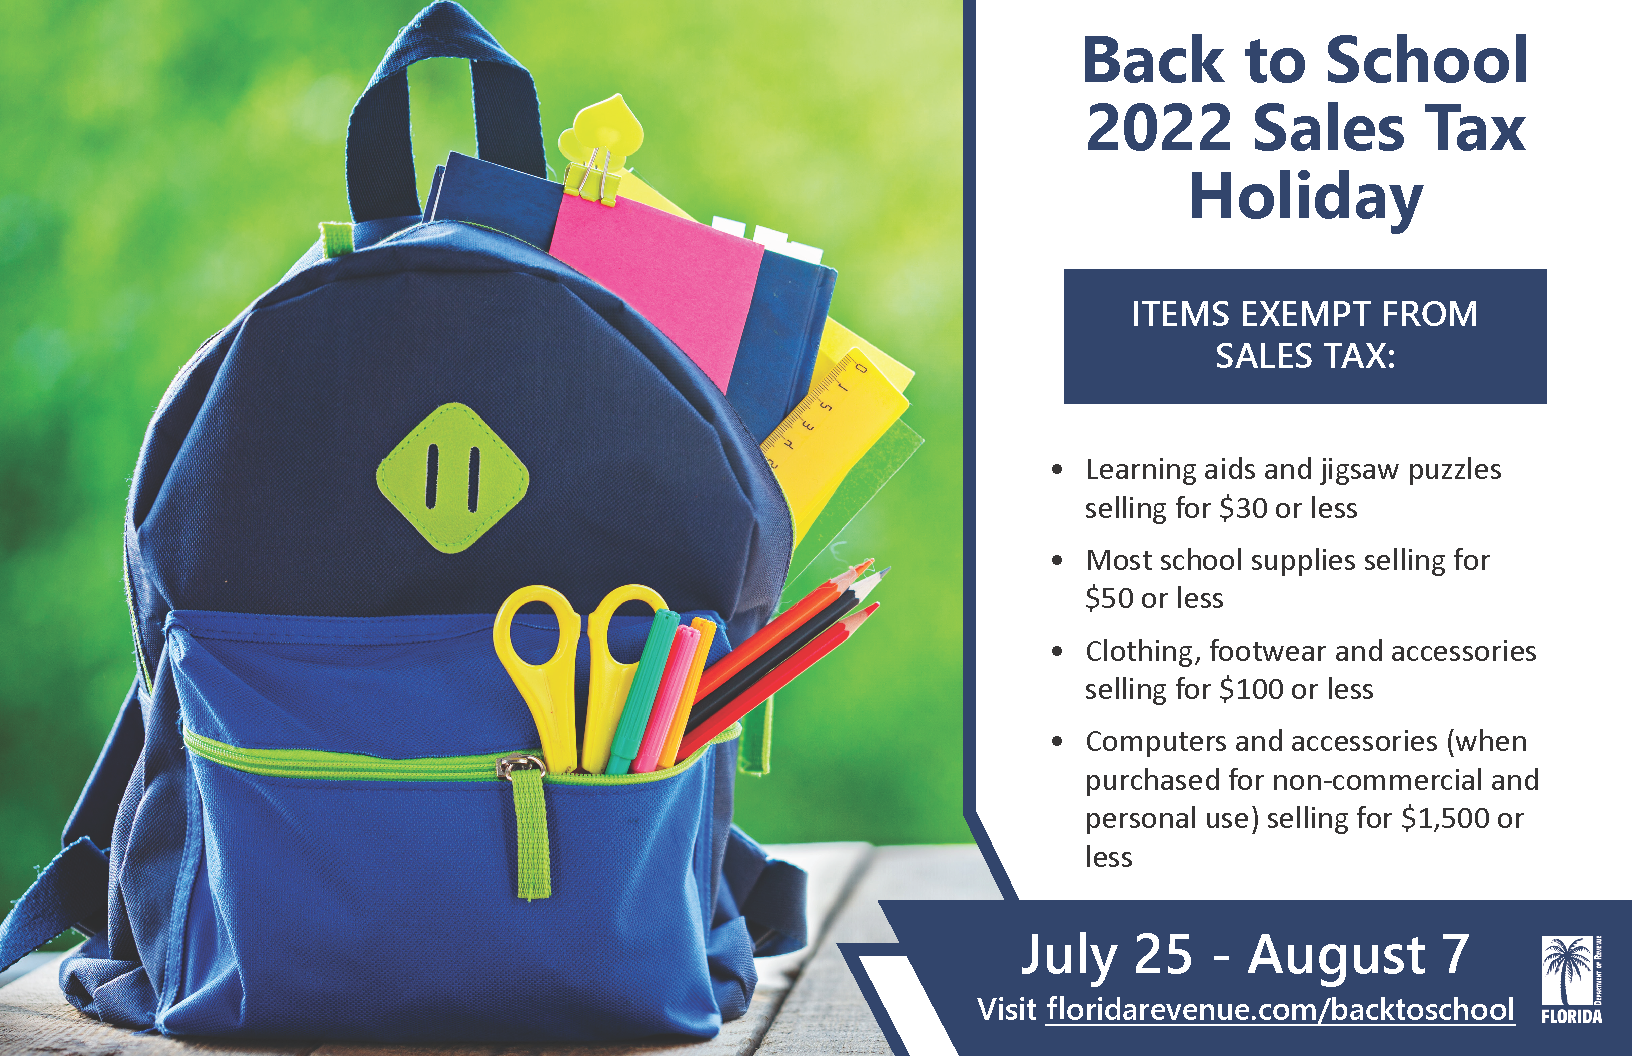 Back-to-School Sales Tax Holiday: What You Need to Know That Can